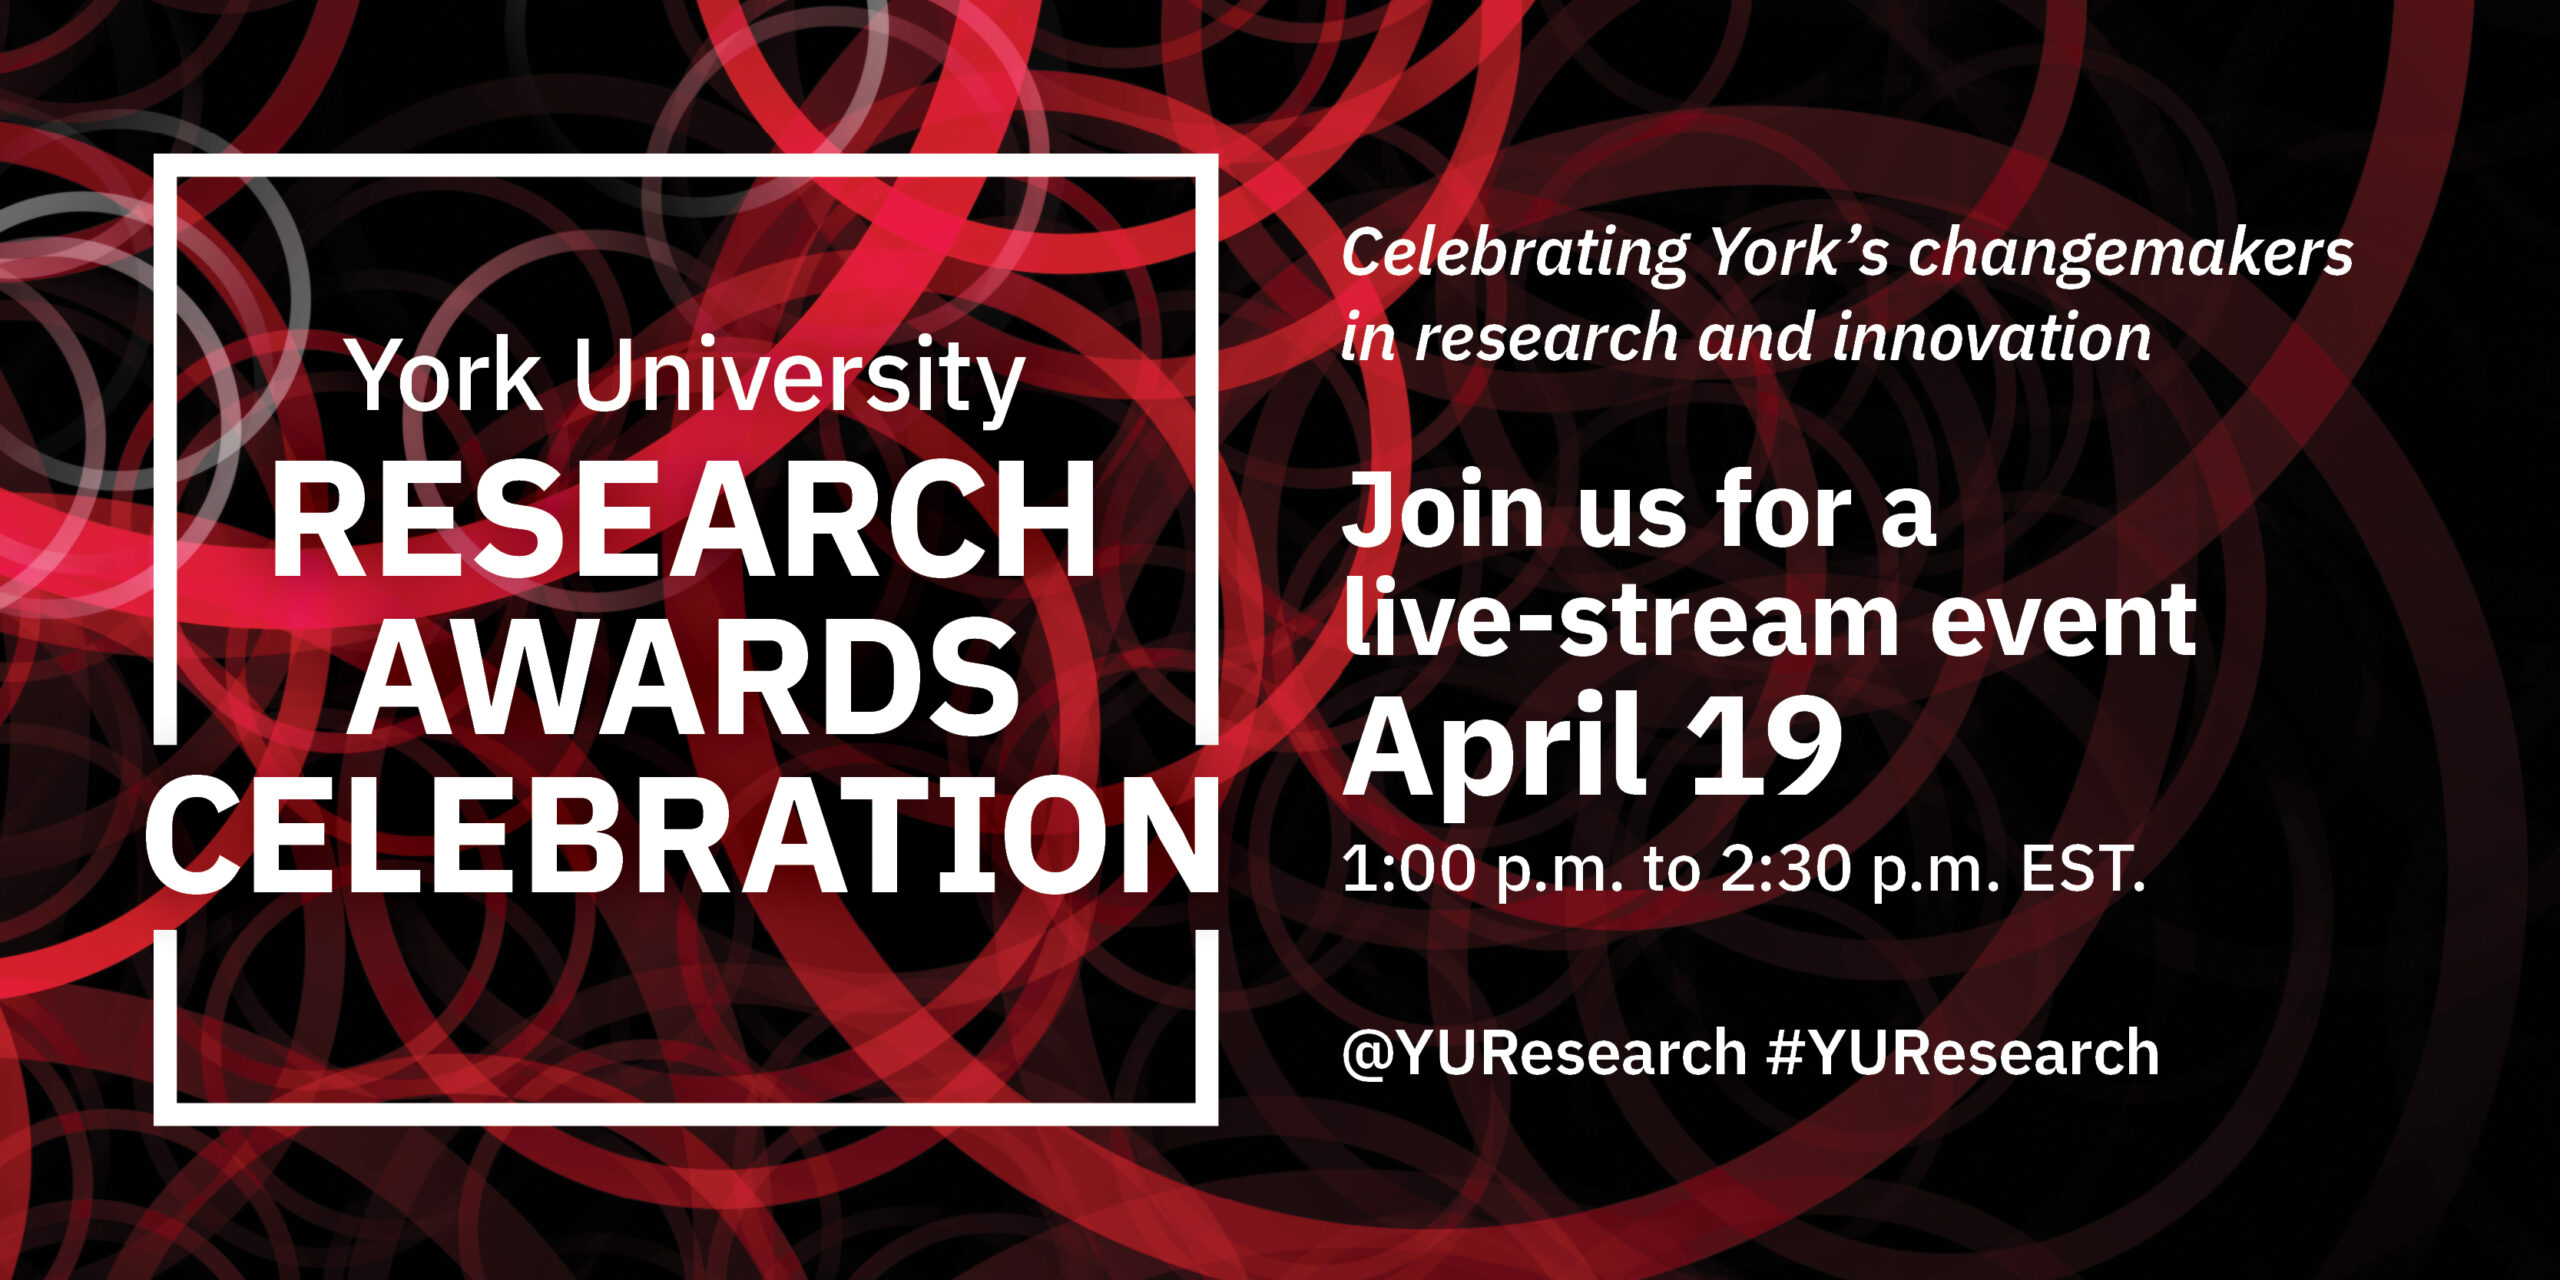 Research Awards Celebration ad